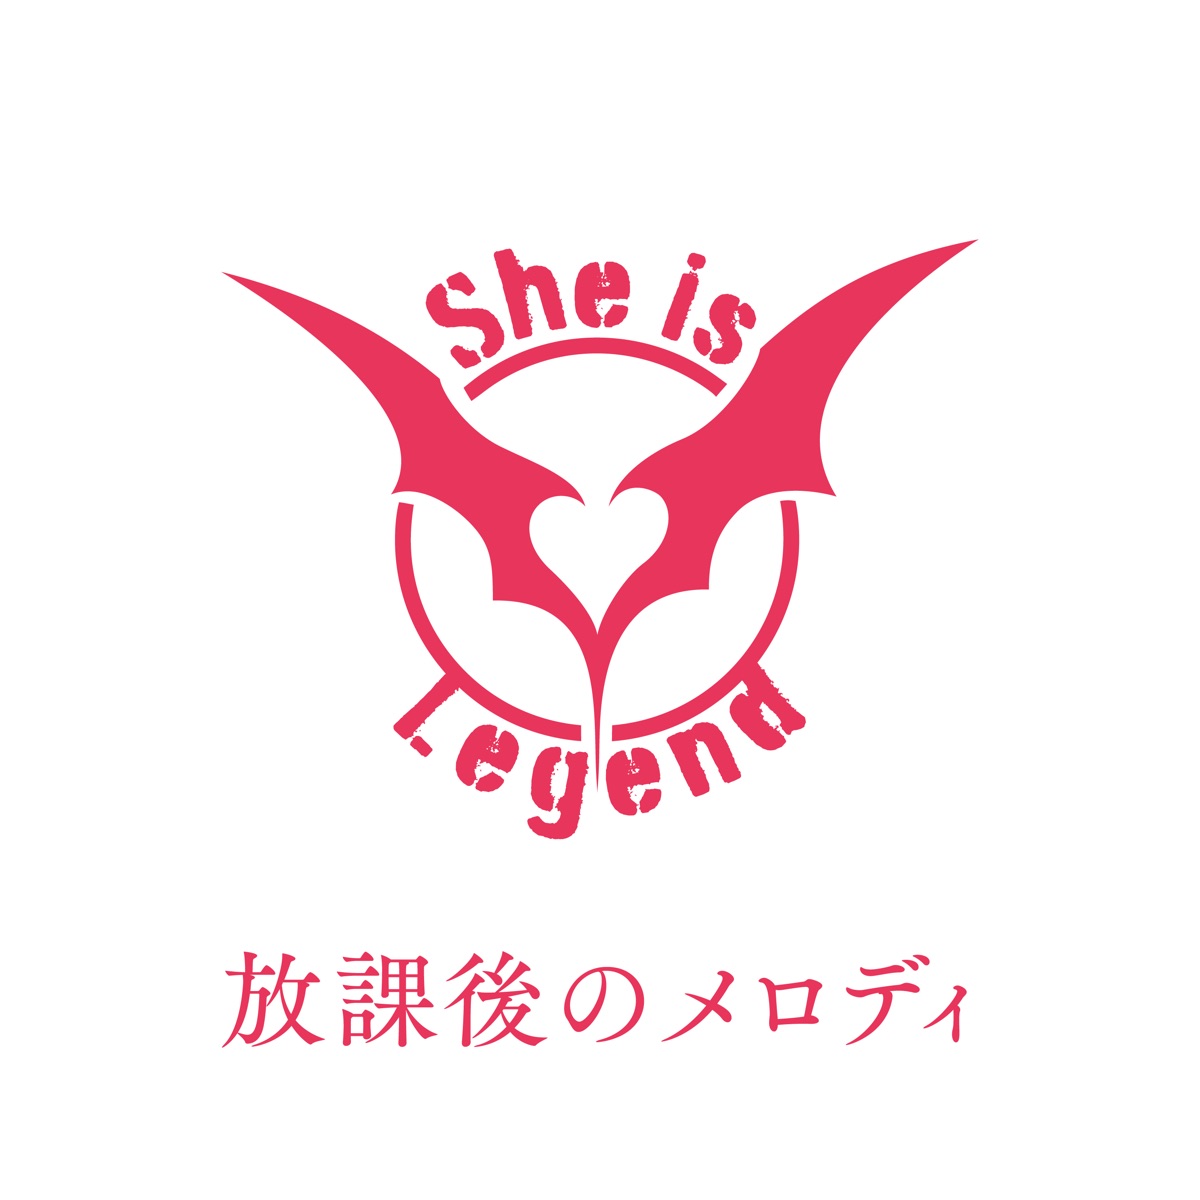 Cover art for『She is Legend - 放課後のメロディ』from the release『Hokago no Melody